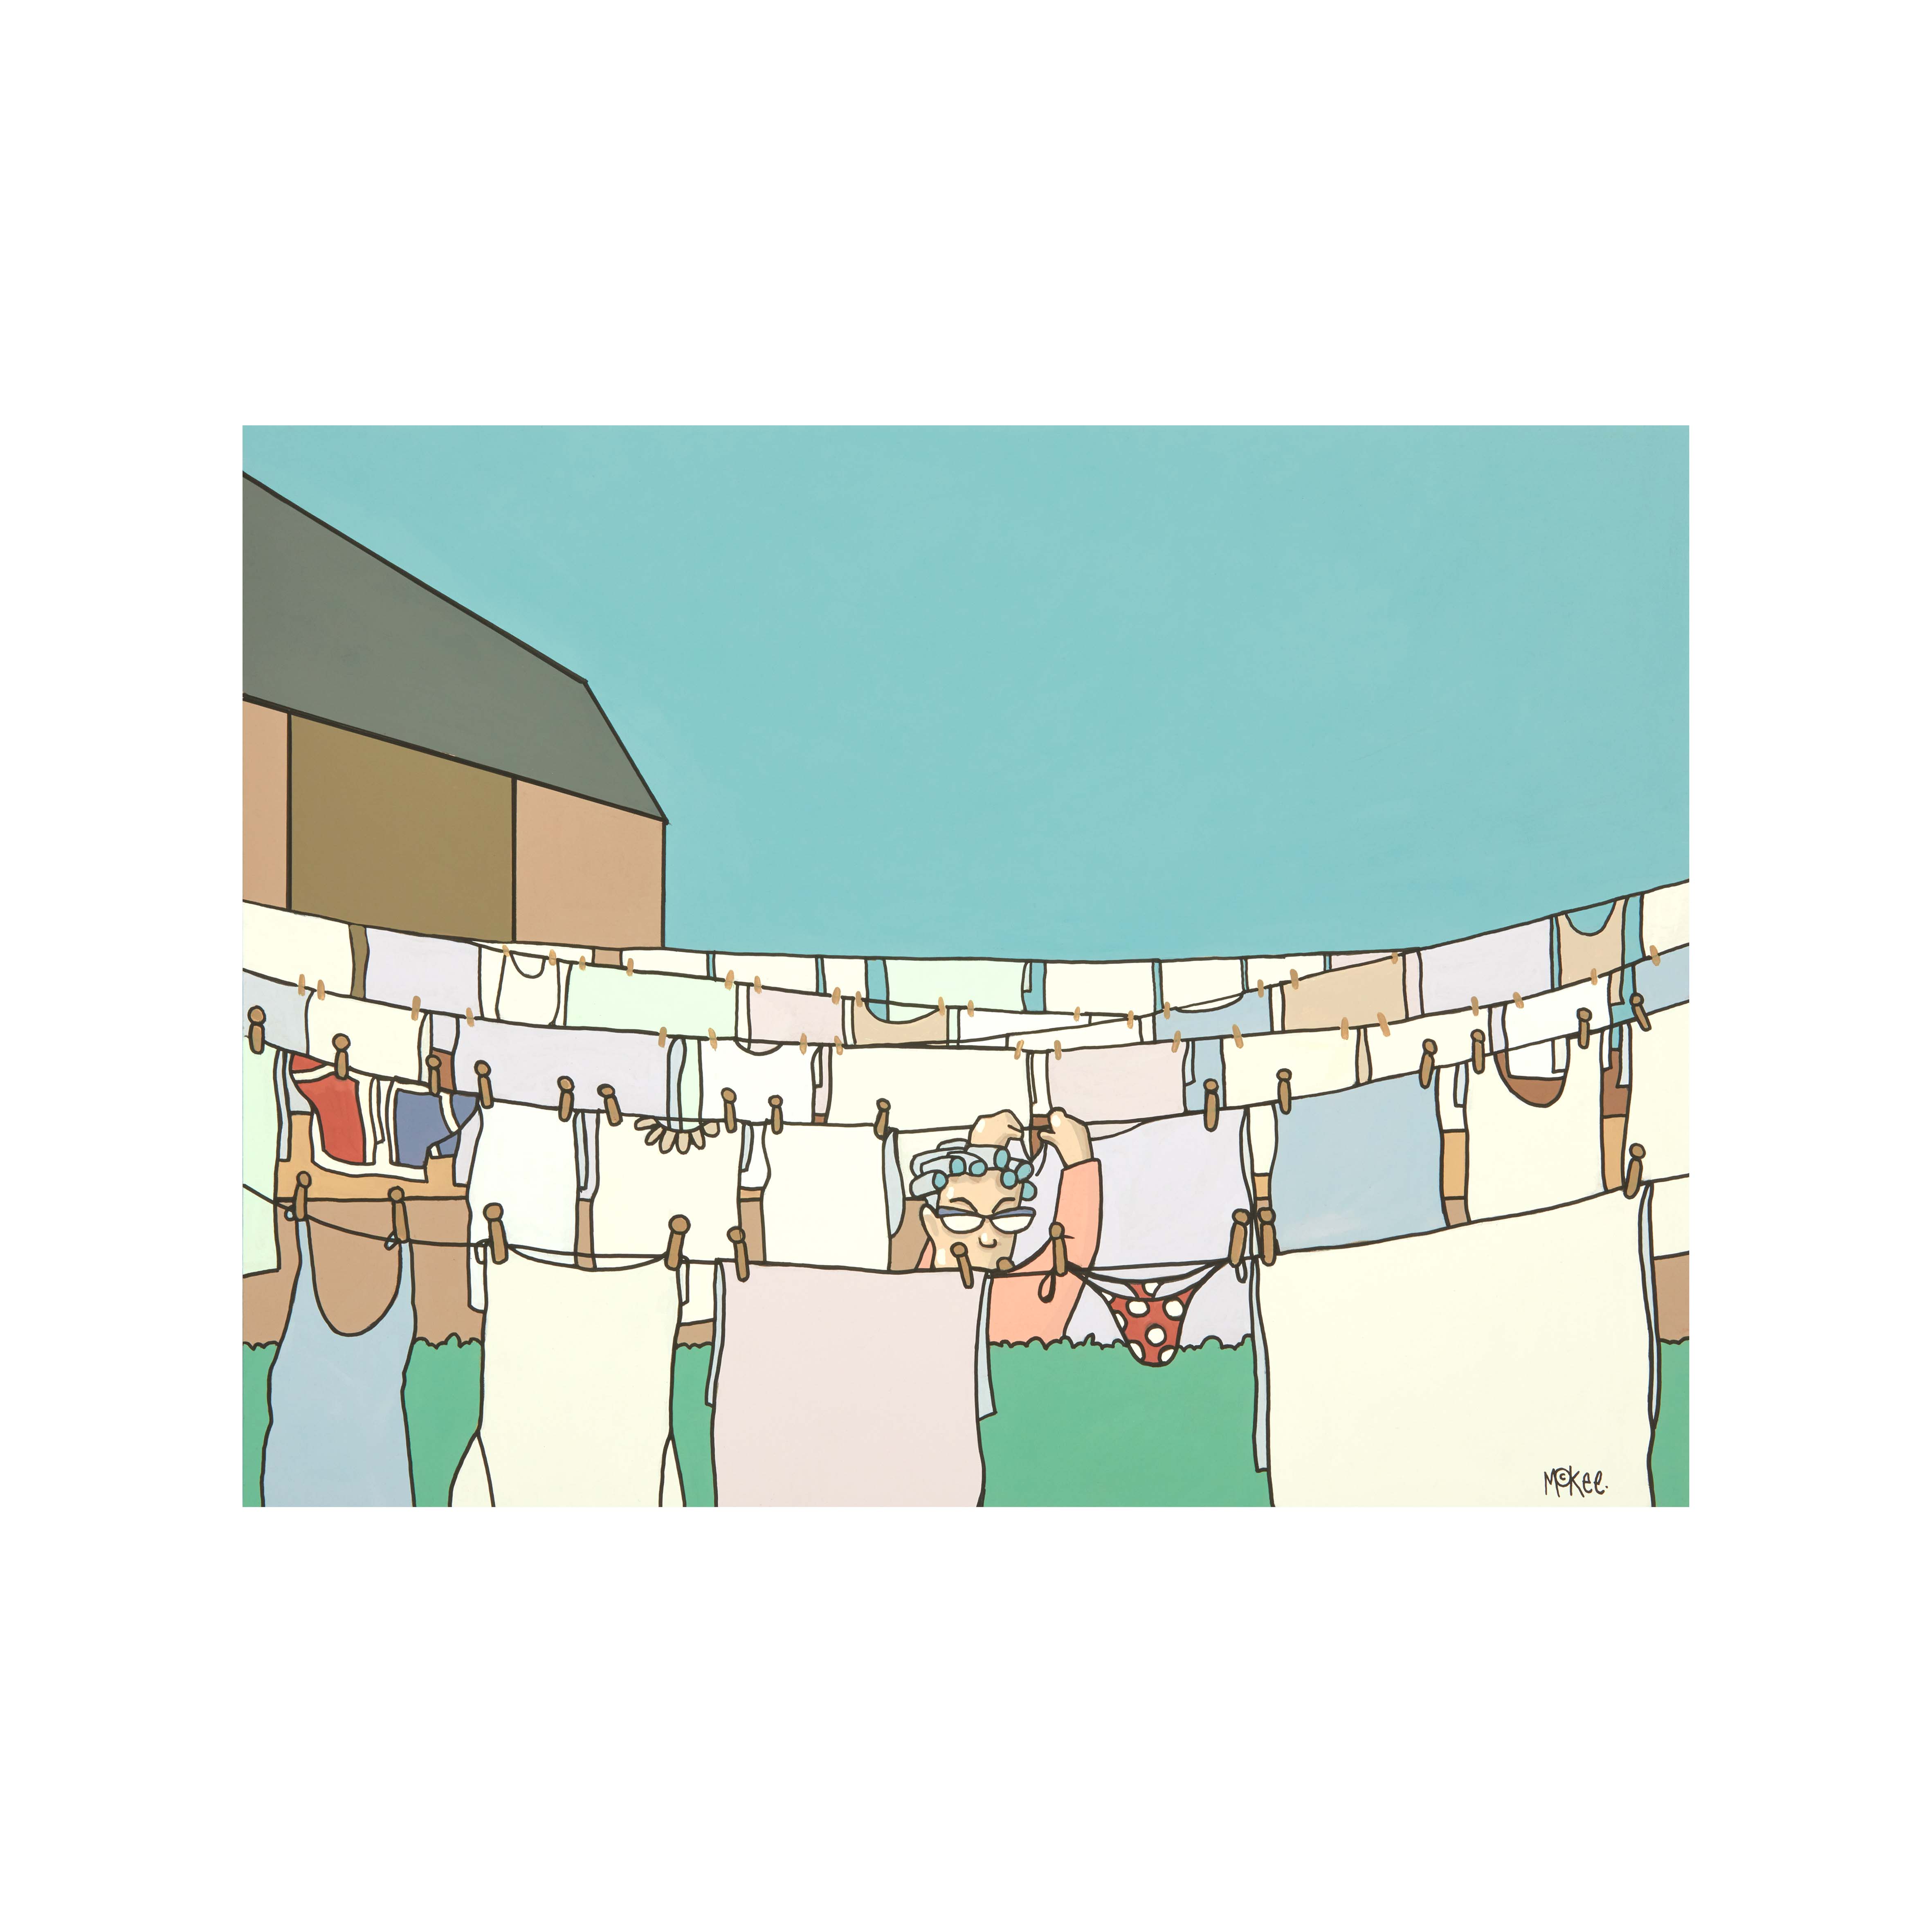 YOUR WASHING LINE IS THE SAME AS MINE